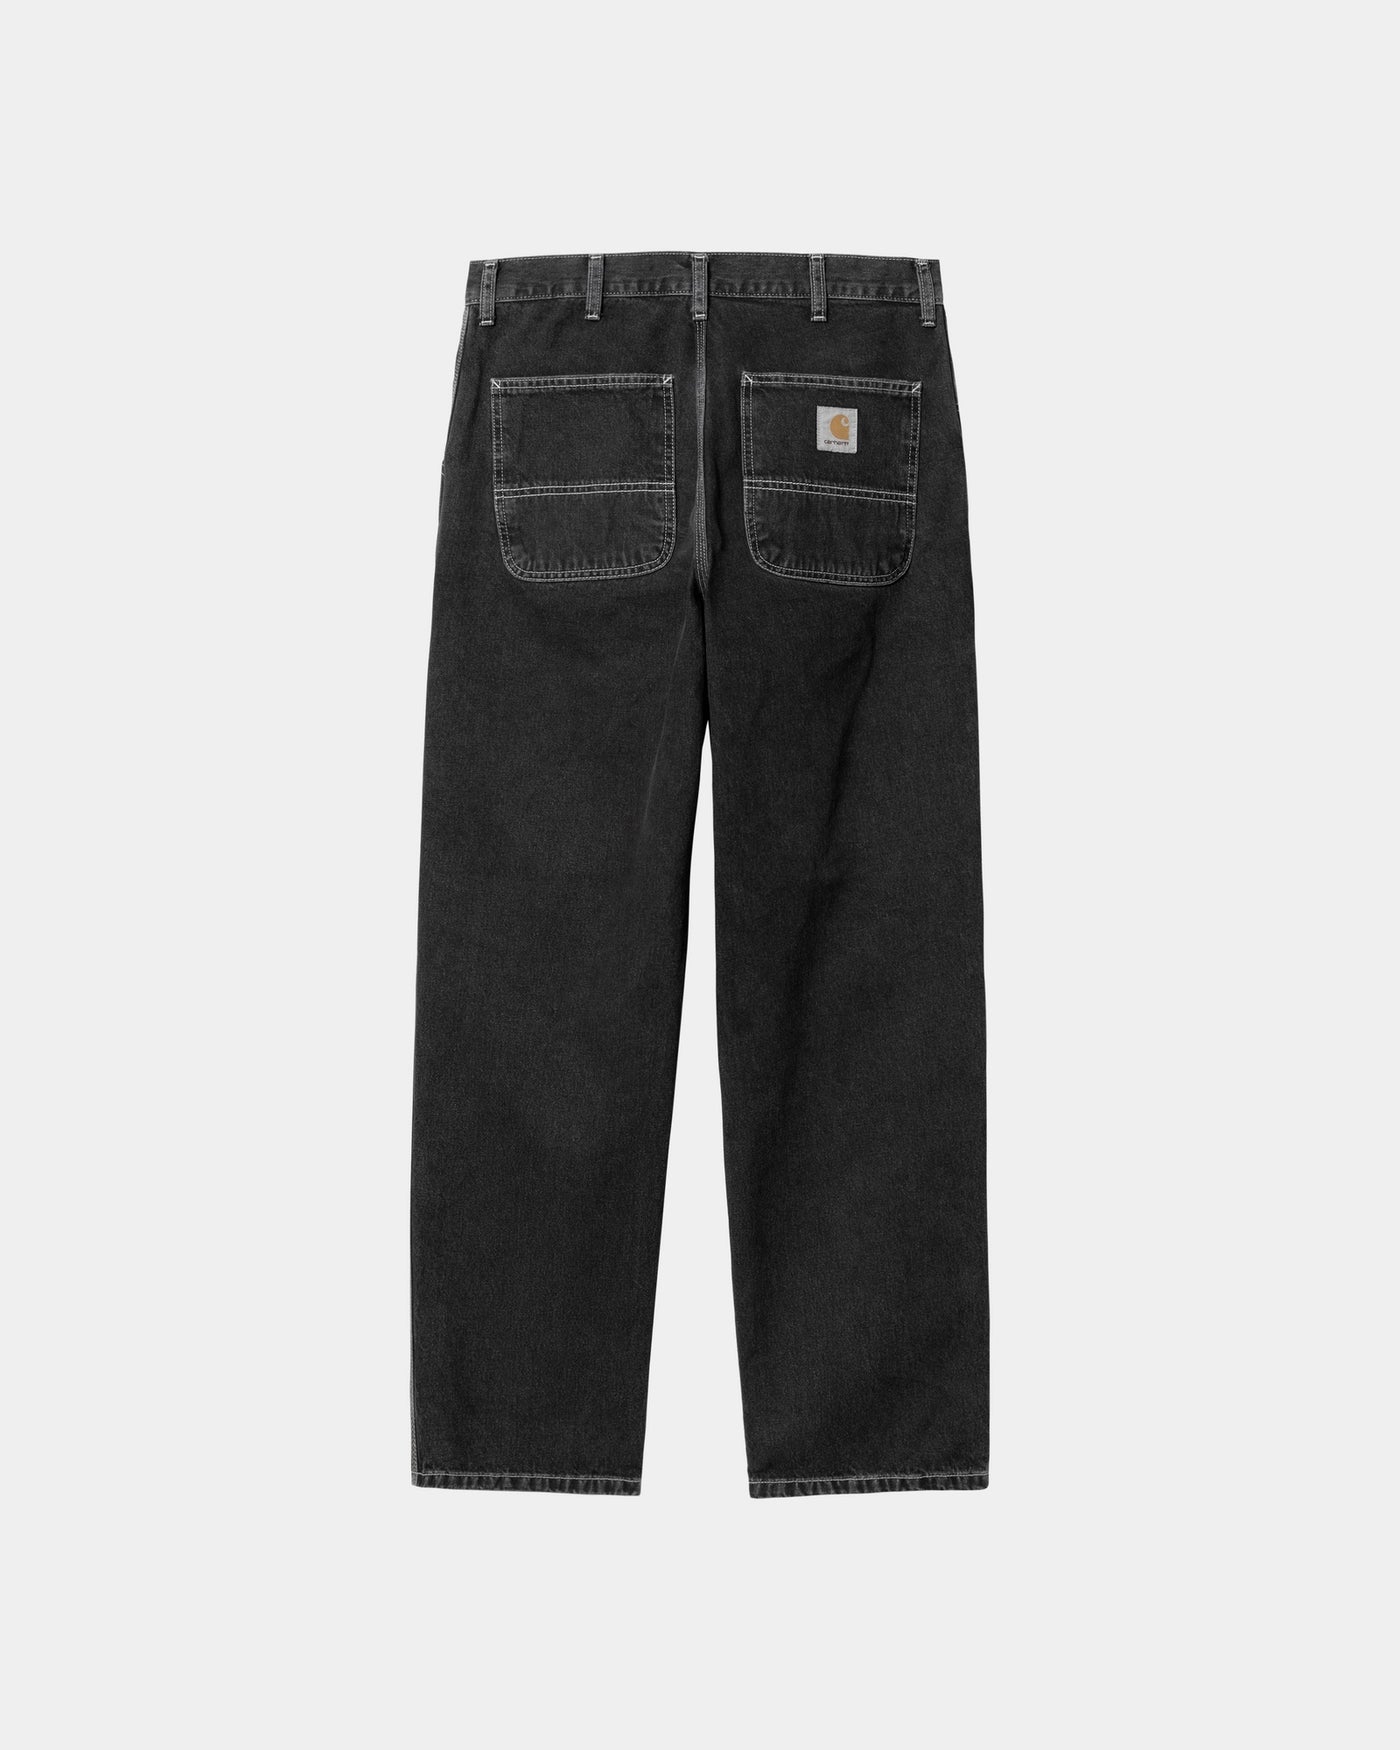 Carhartt WIP - Simple Pant Black Stone Washed